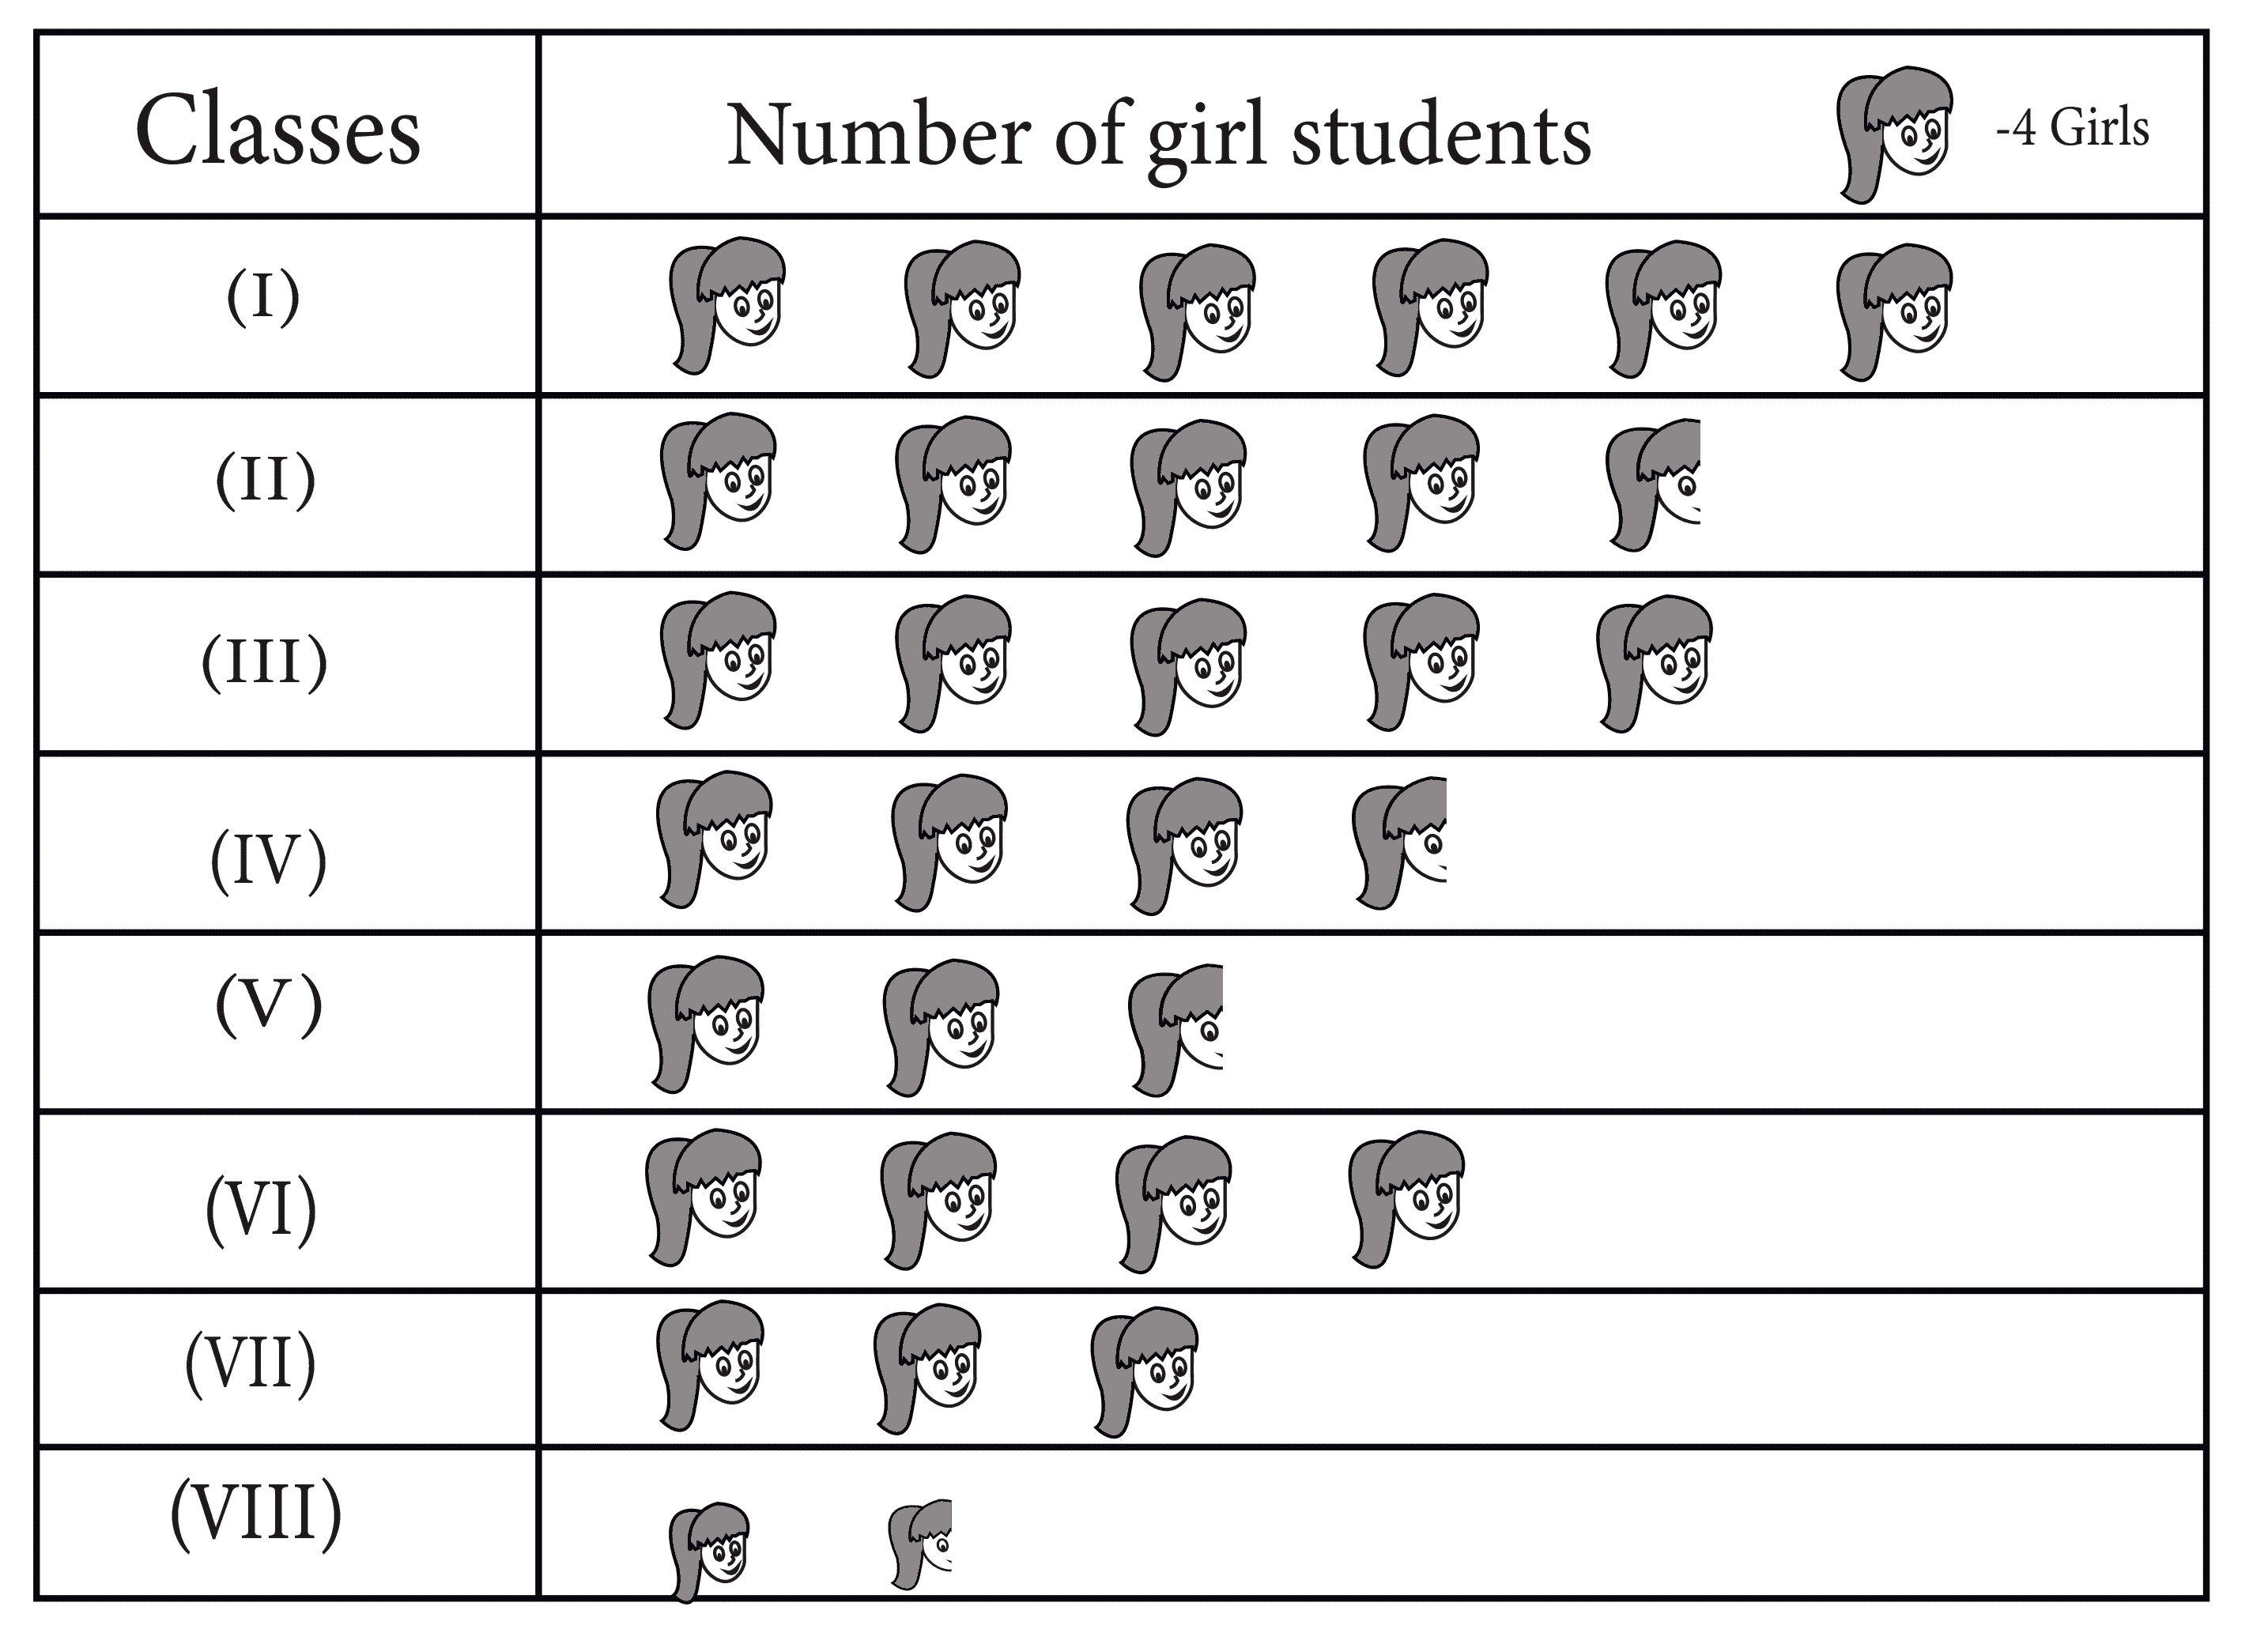 Number of girl students in different classes